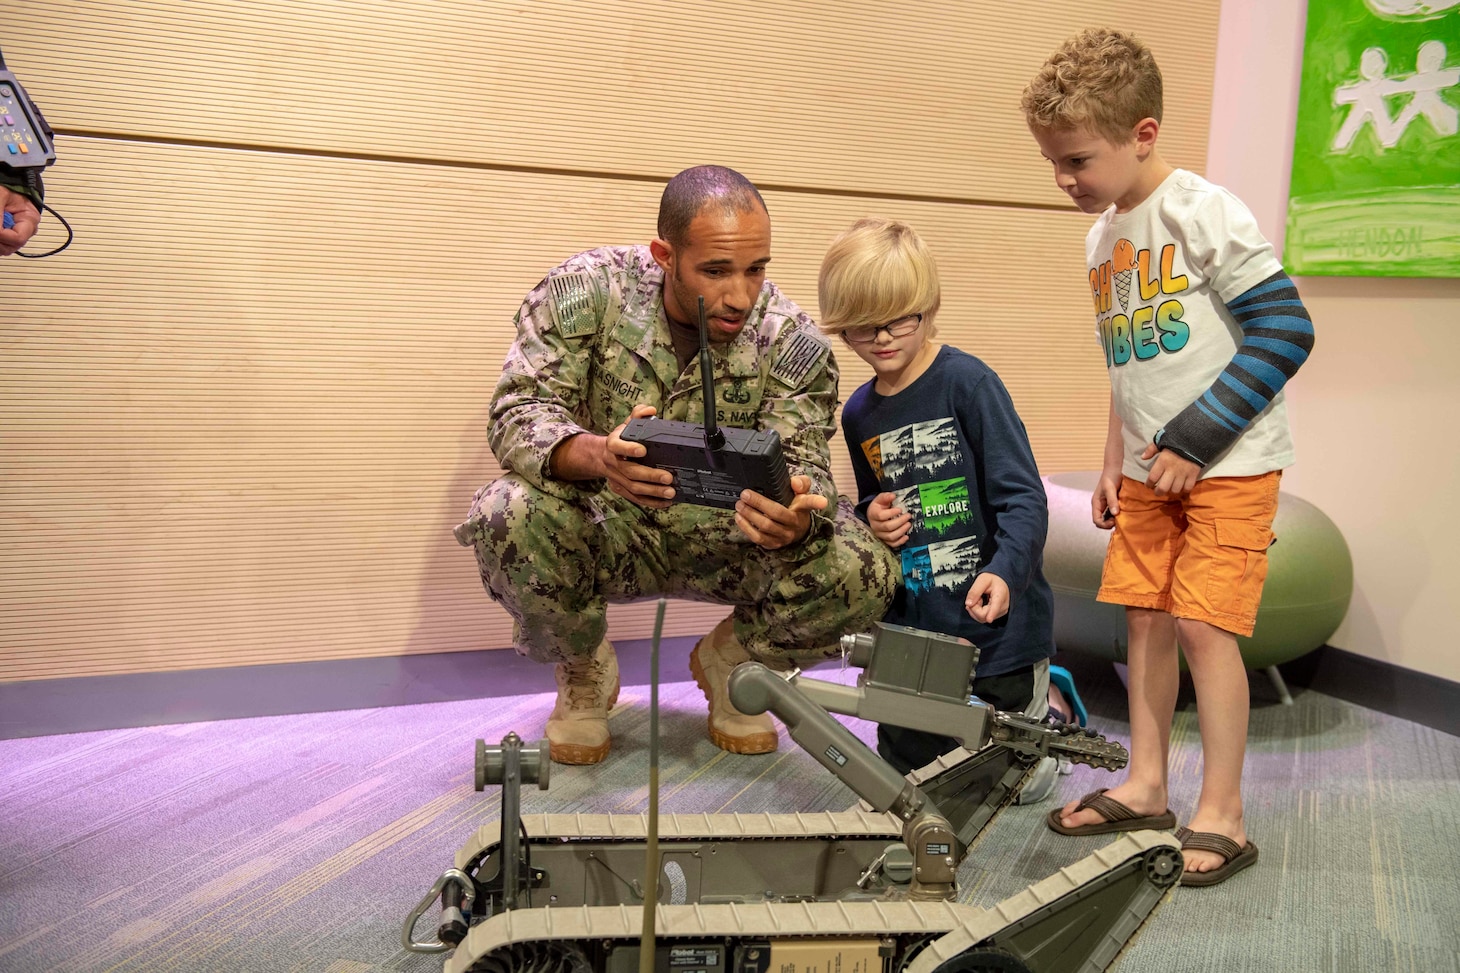 190607-N-GX781-0178 NASHVILLE, Tenn. (June 07, 2019) Chief Explosive Ordnance Disposal Technician Harry Basnight teaches children at the Monroe Carell Jr. Children's Hospital to operate a bomb disposal robot during Nashville Navy Week. The Navy Week program serves as the Navy’s principle outreach effort in areas of the country without a significant Navy presence. (U.S. Navy photo by Mass Communication Specialist 3rd Class Colbey Livingston/Released)